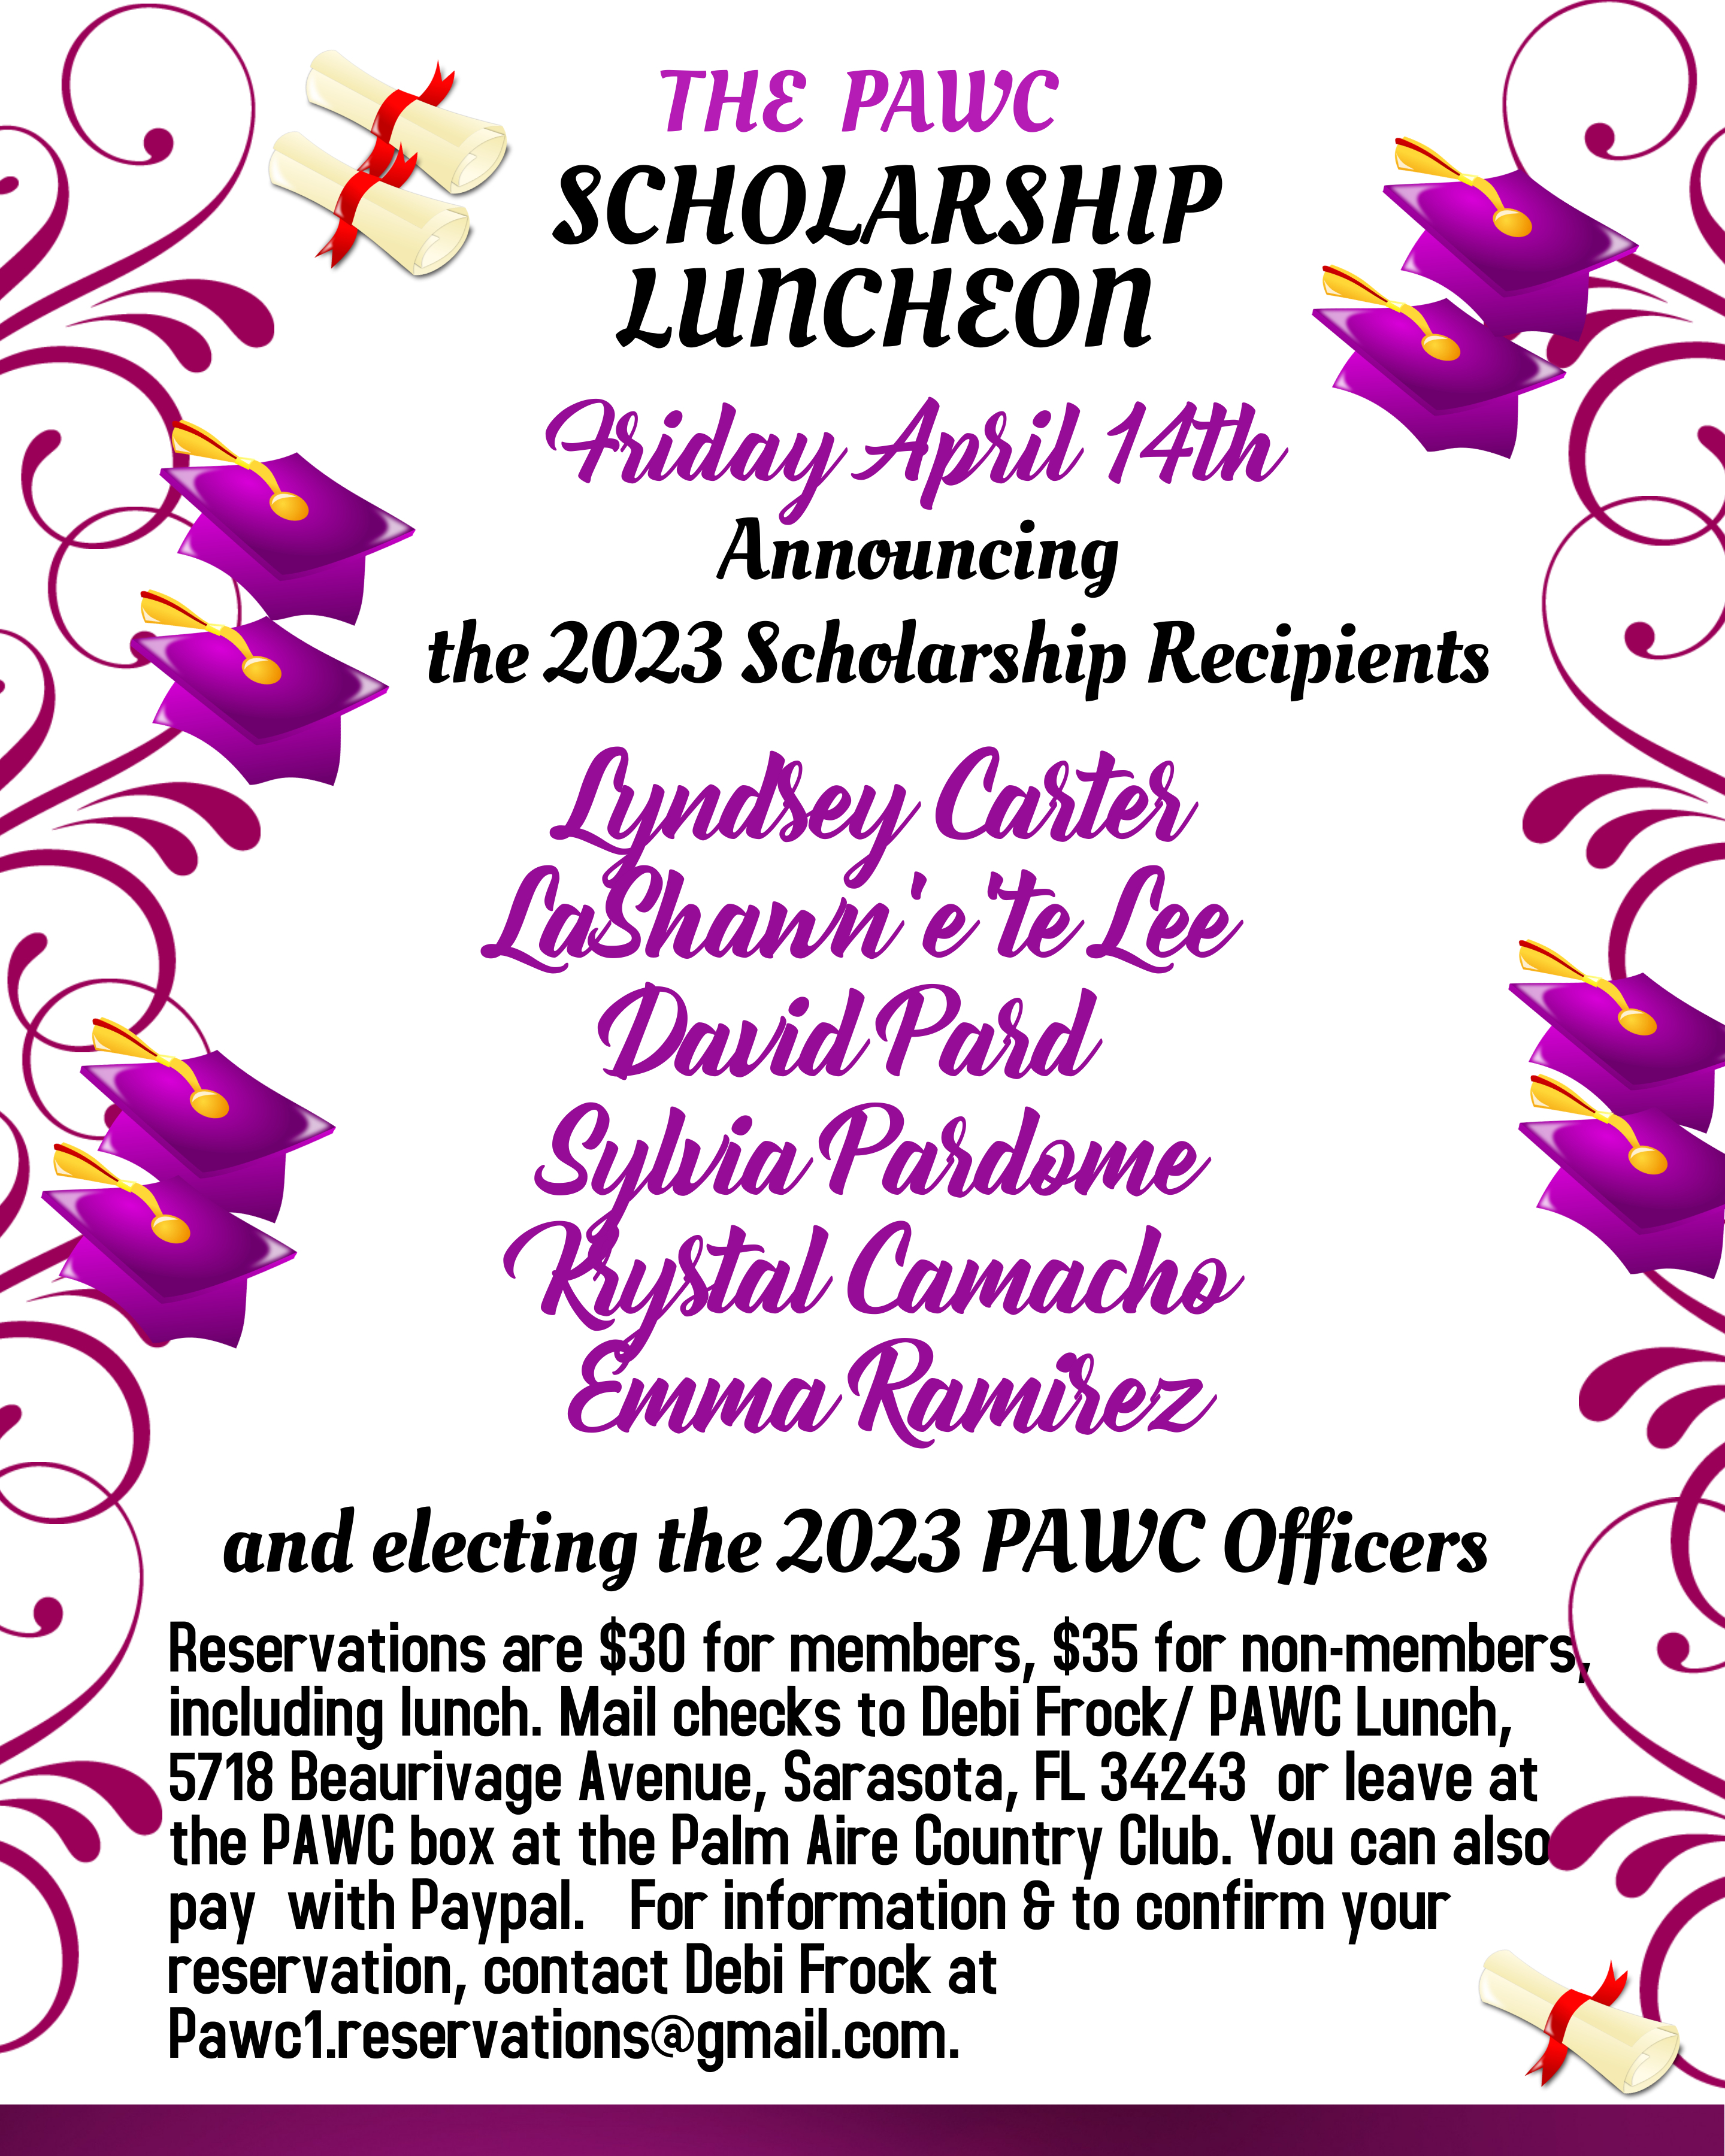 At the April 14th luncheon, the Palm-Aire Women’s Club will award scholarships to deserving local students